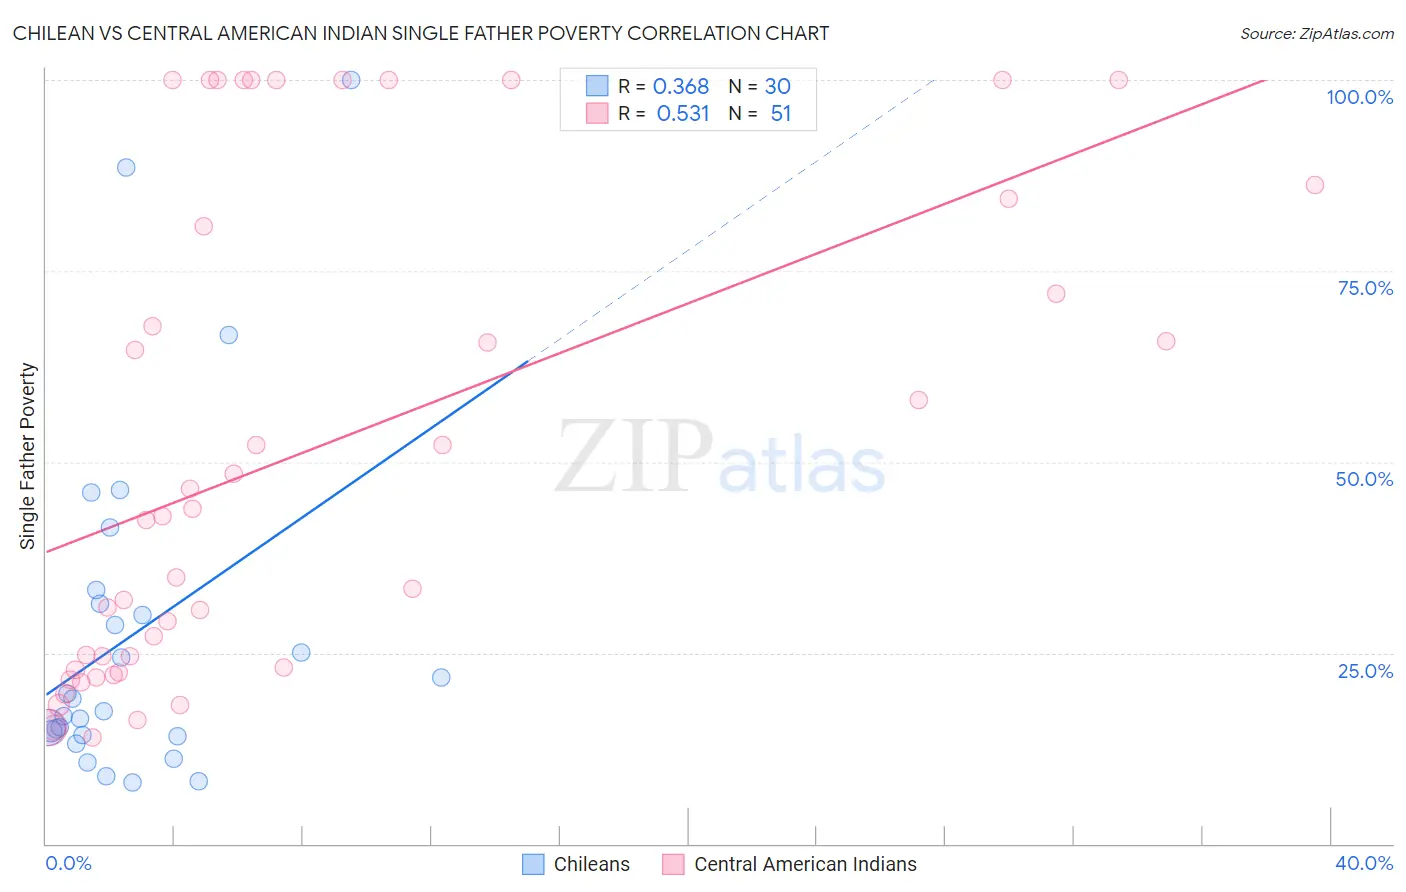 Chilean vs Central American Indian Single Father Poverty